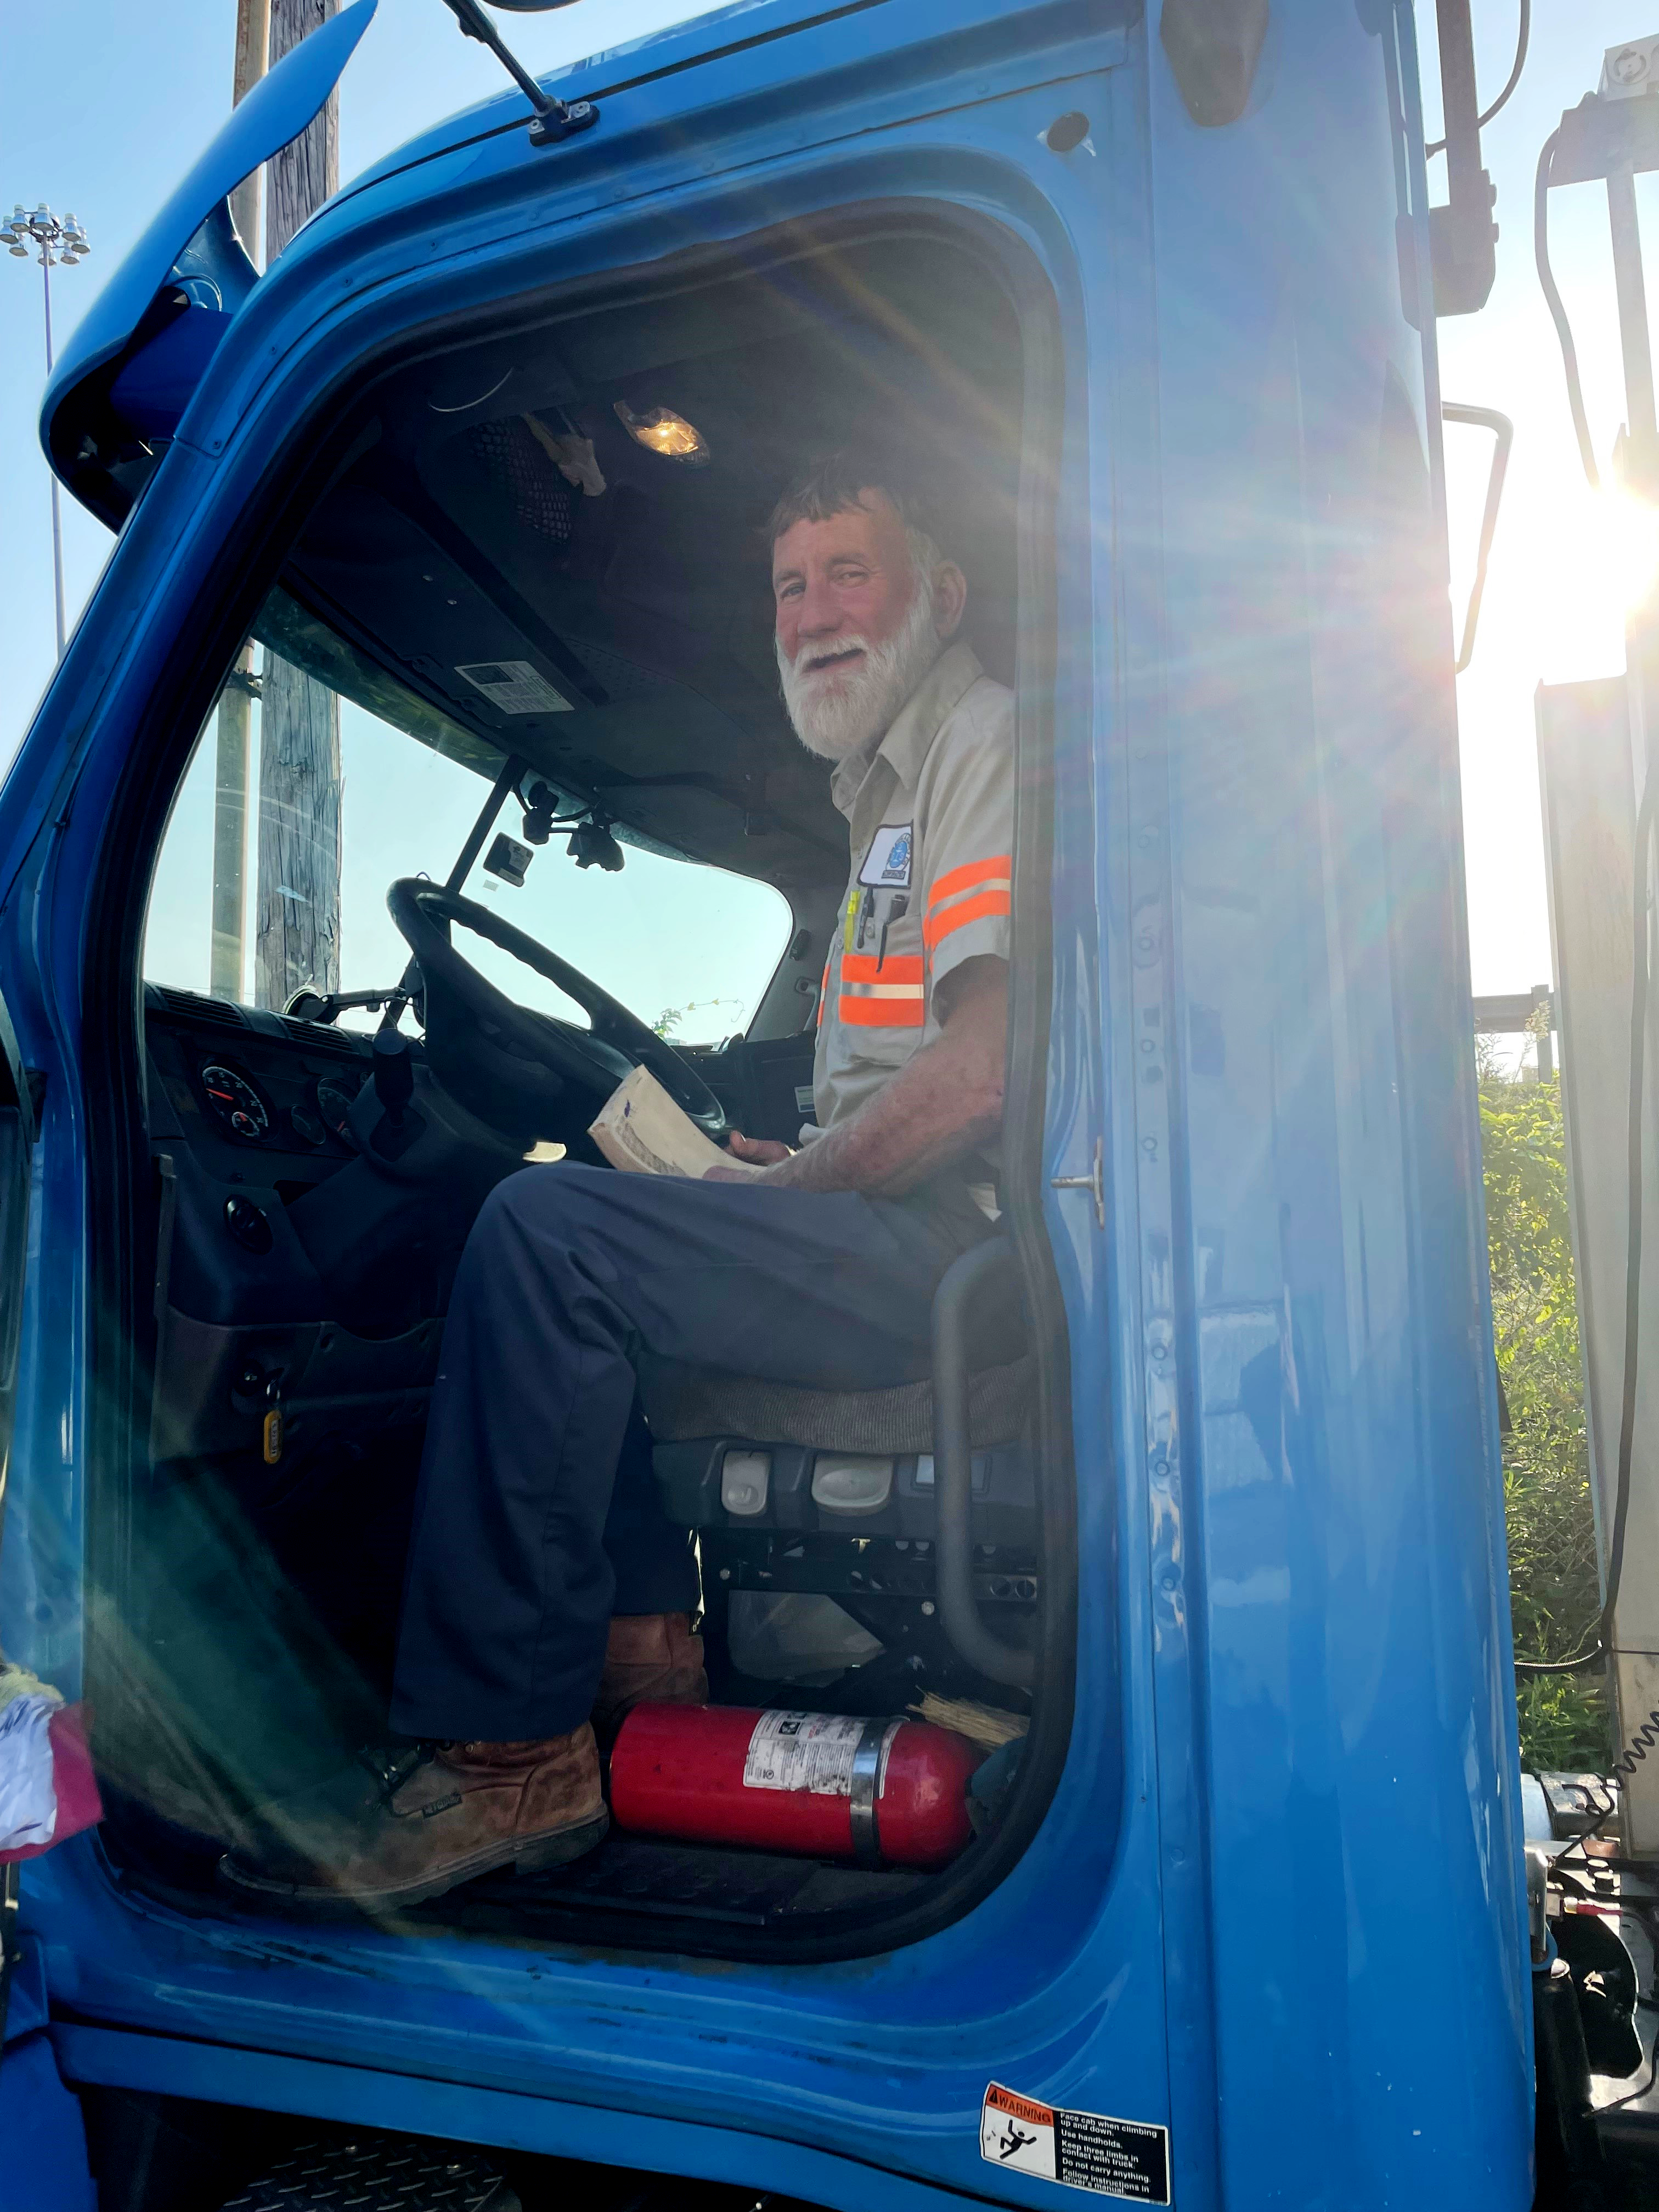 Siskin truck driver sitting in his cab with the sun shining.